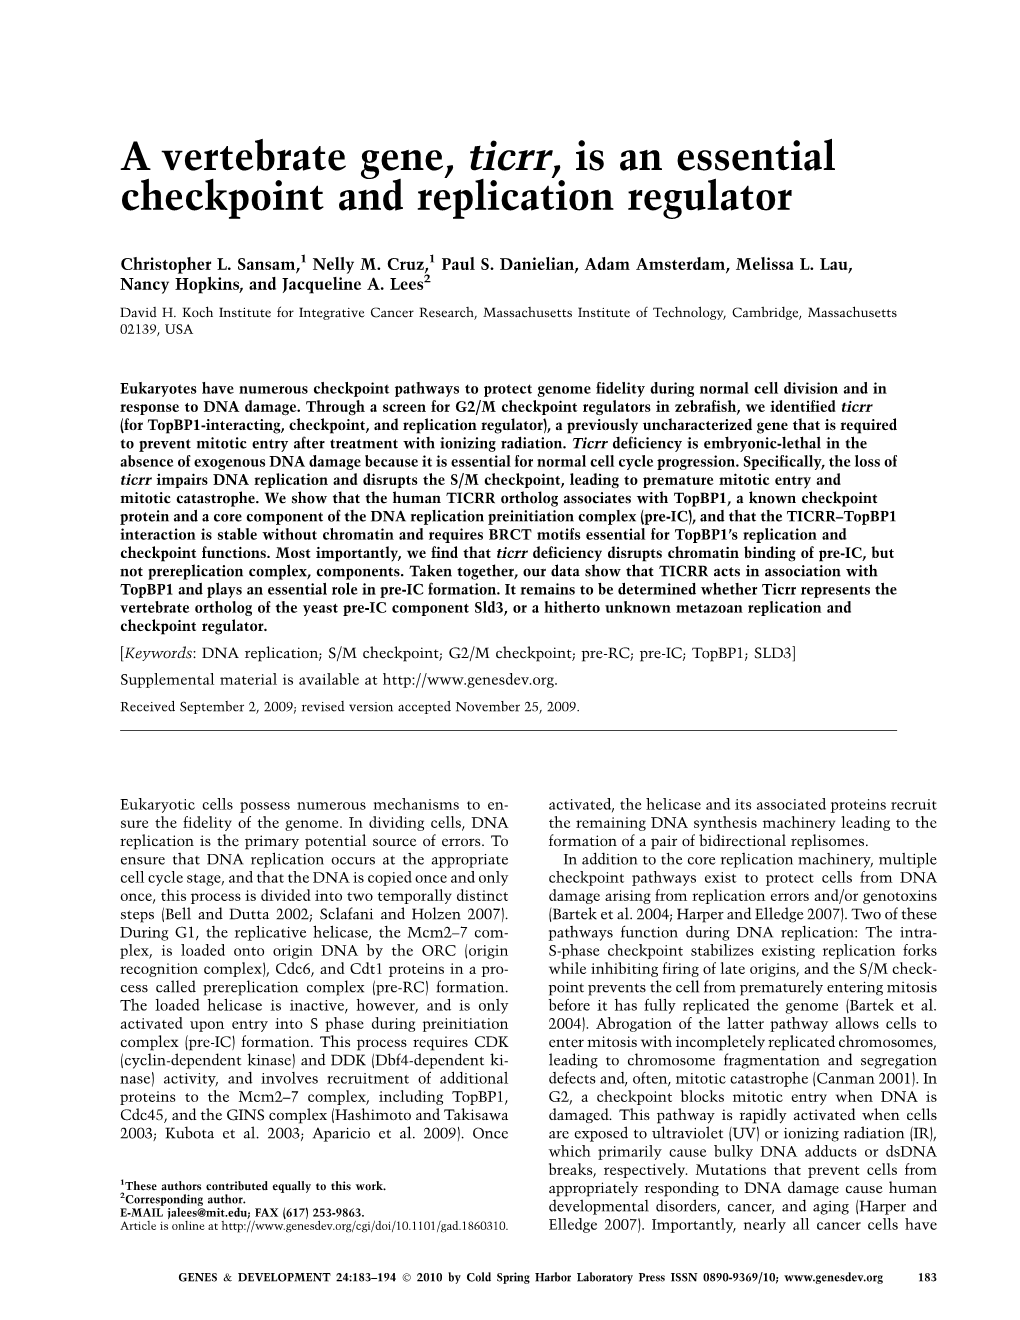 A Vertebrate Gene, Ticrr, Is an Essential Checkpoint and Replication Regulator